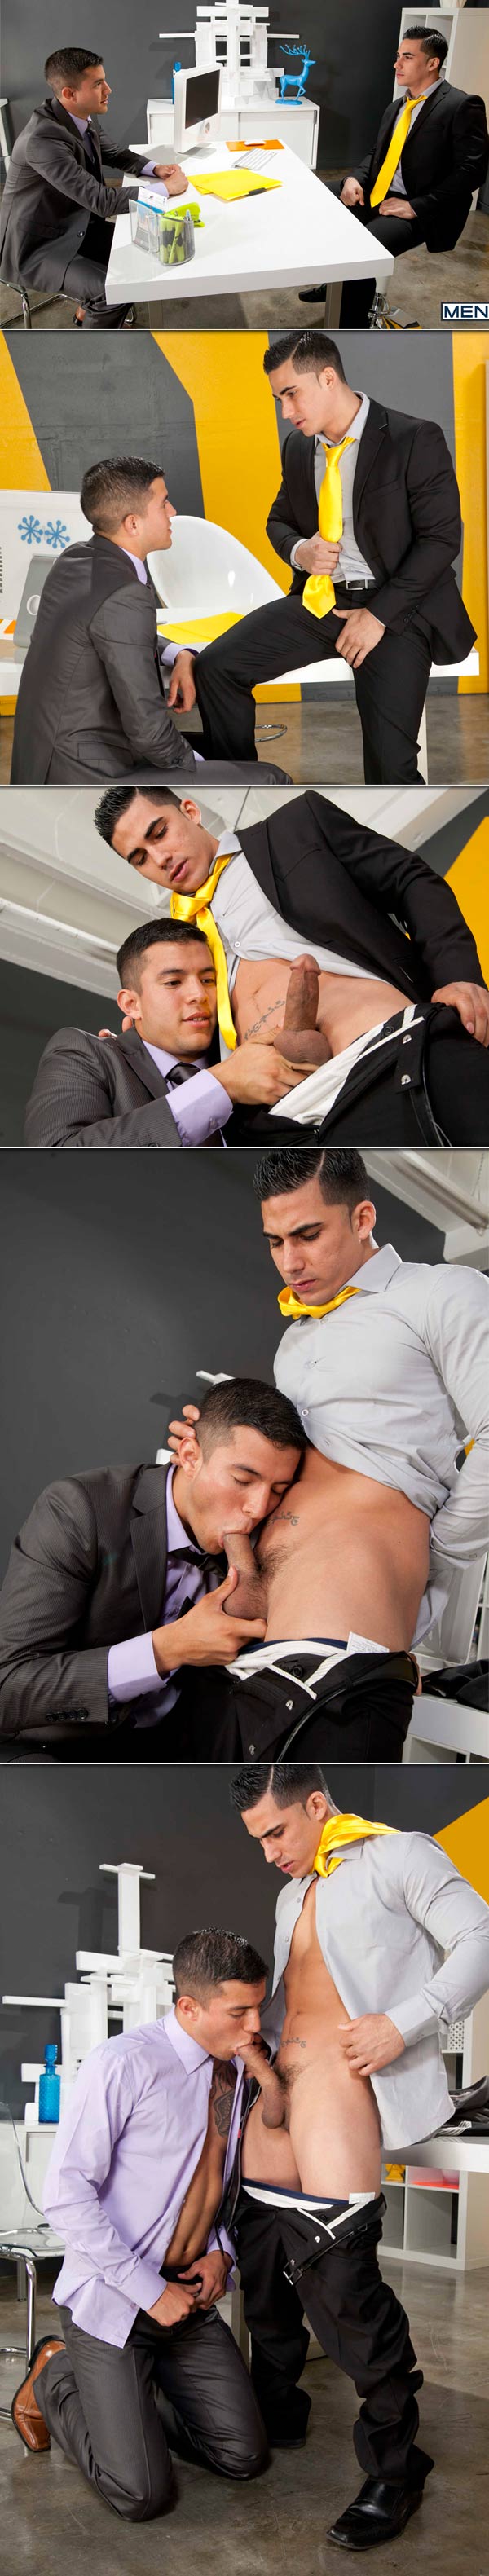 Open Position (Joey Rios & Topher DiMaggio) at The Gay Office